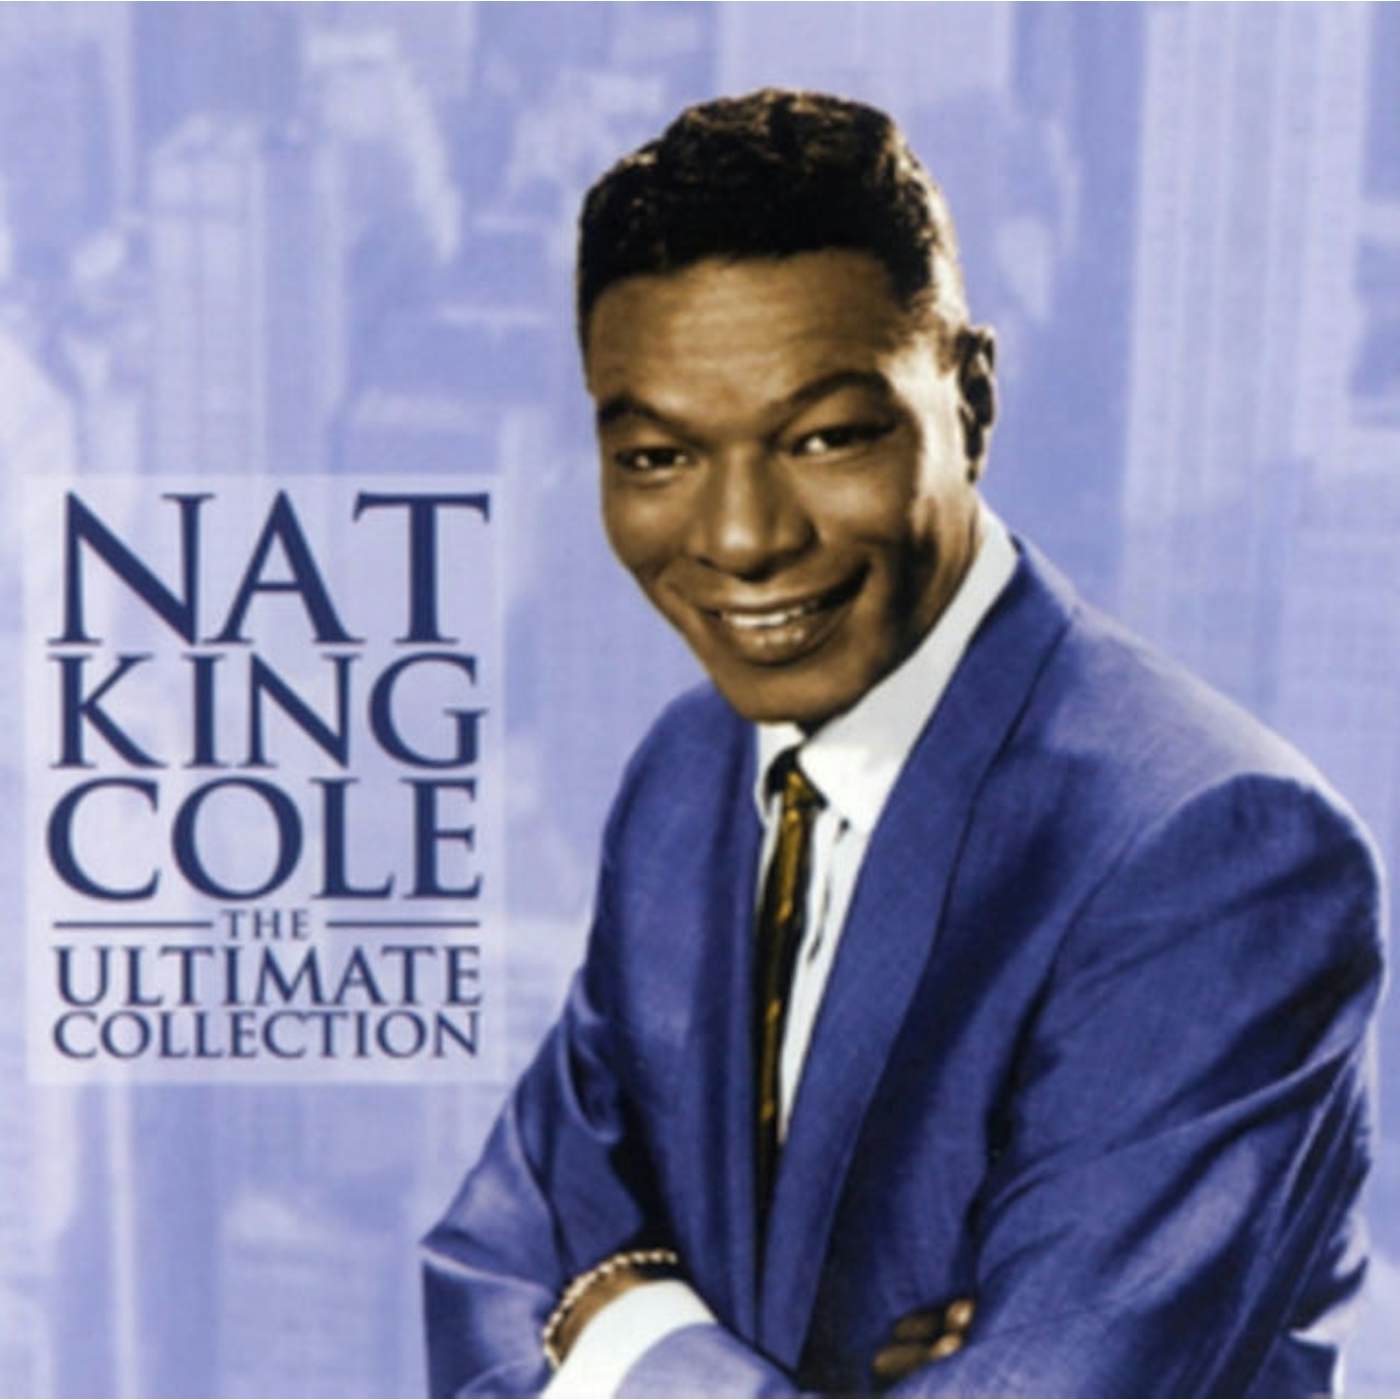 Nat King Cole CD - The Ultimate Collection